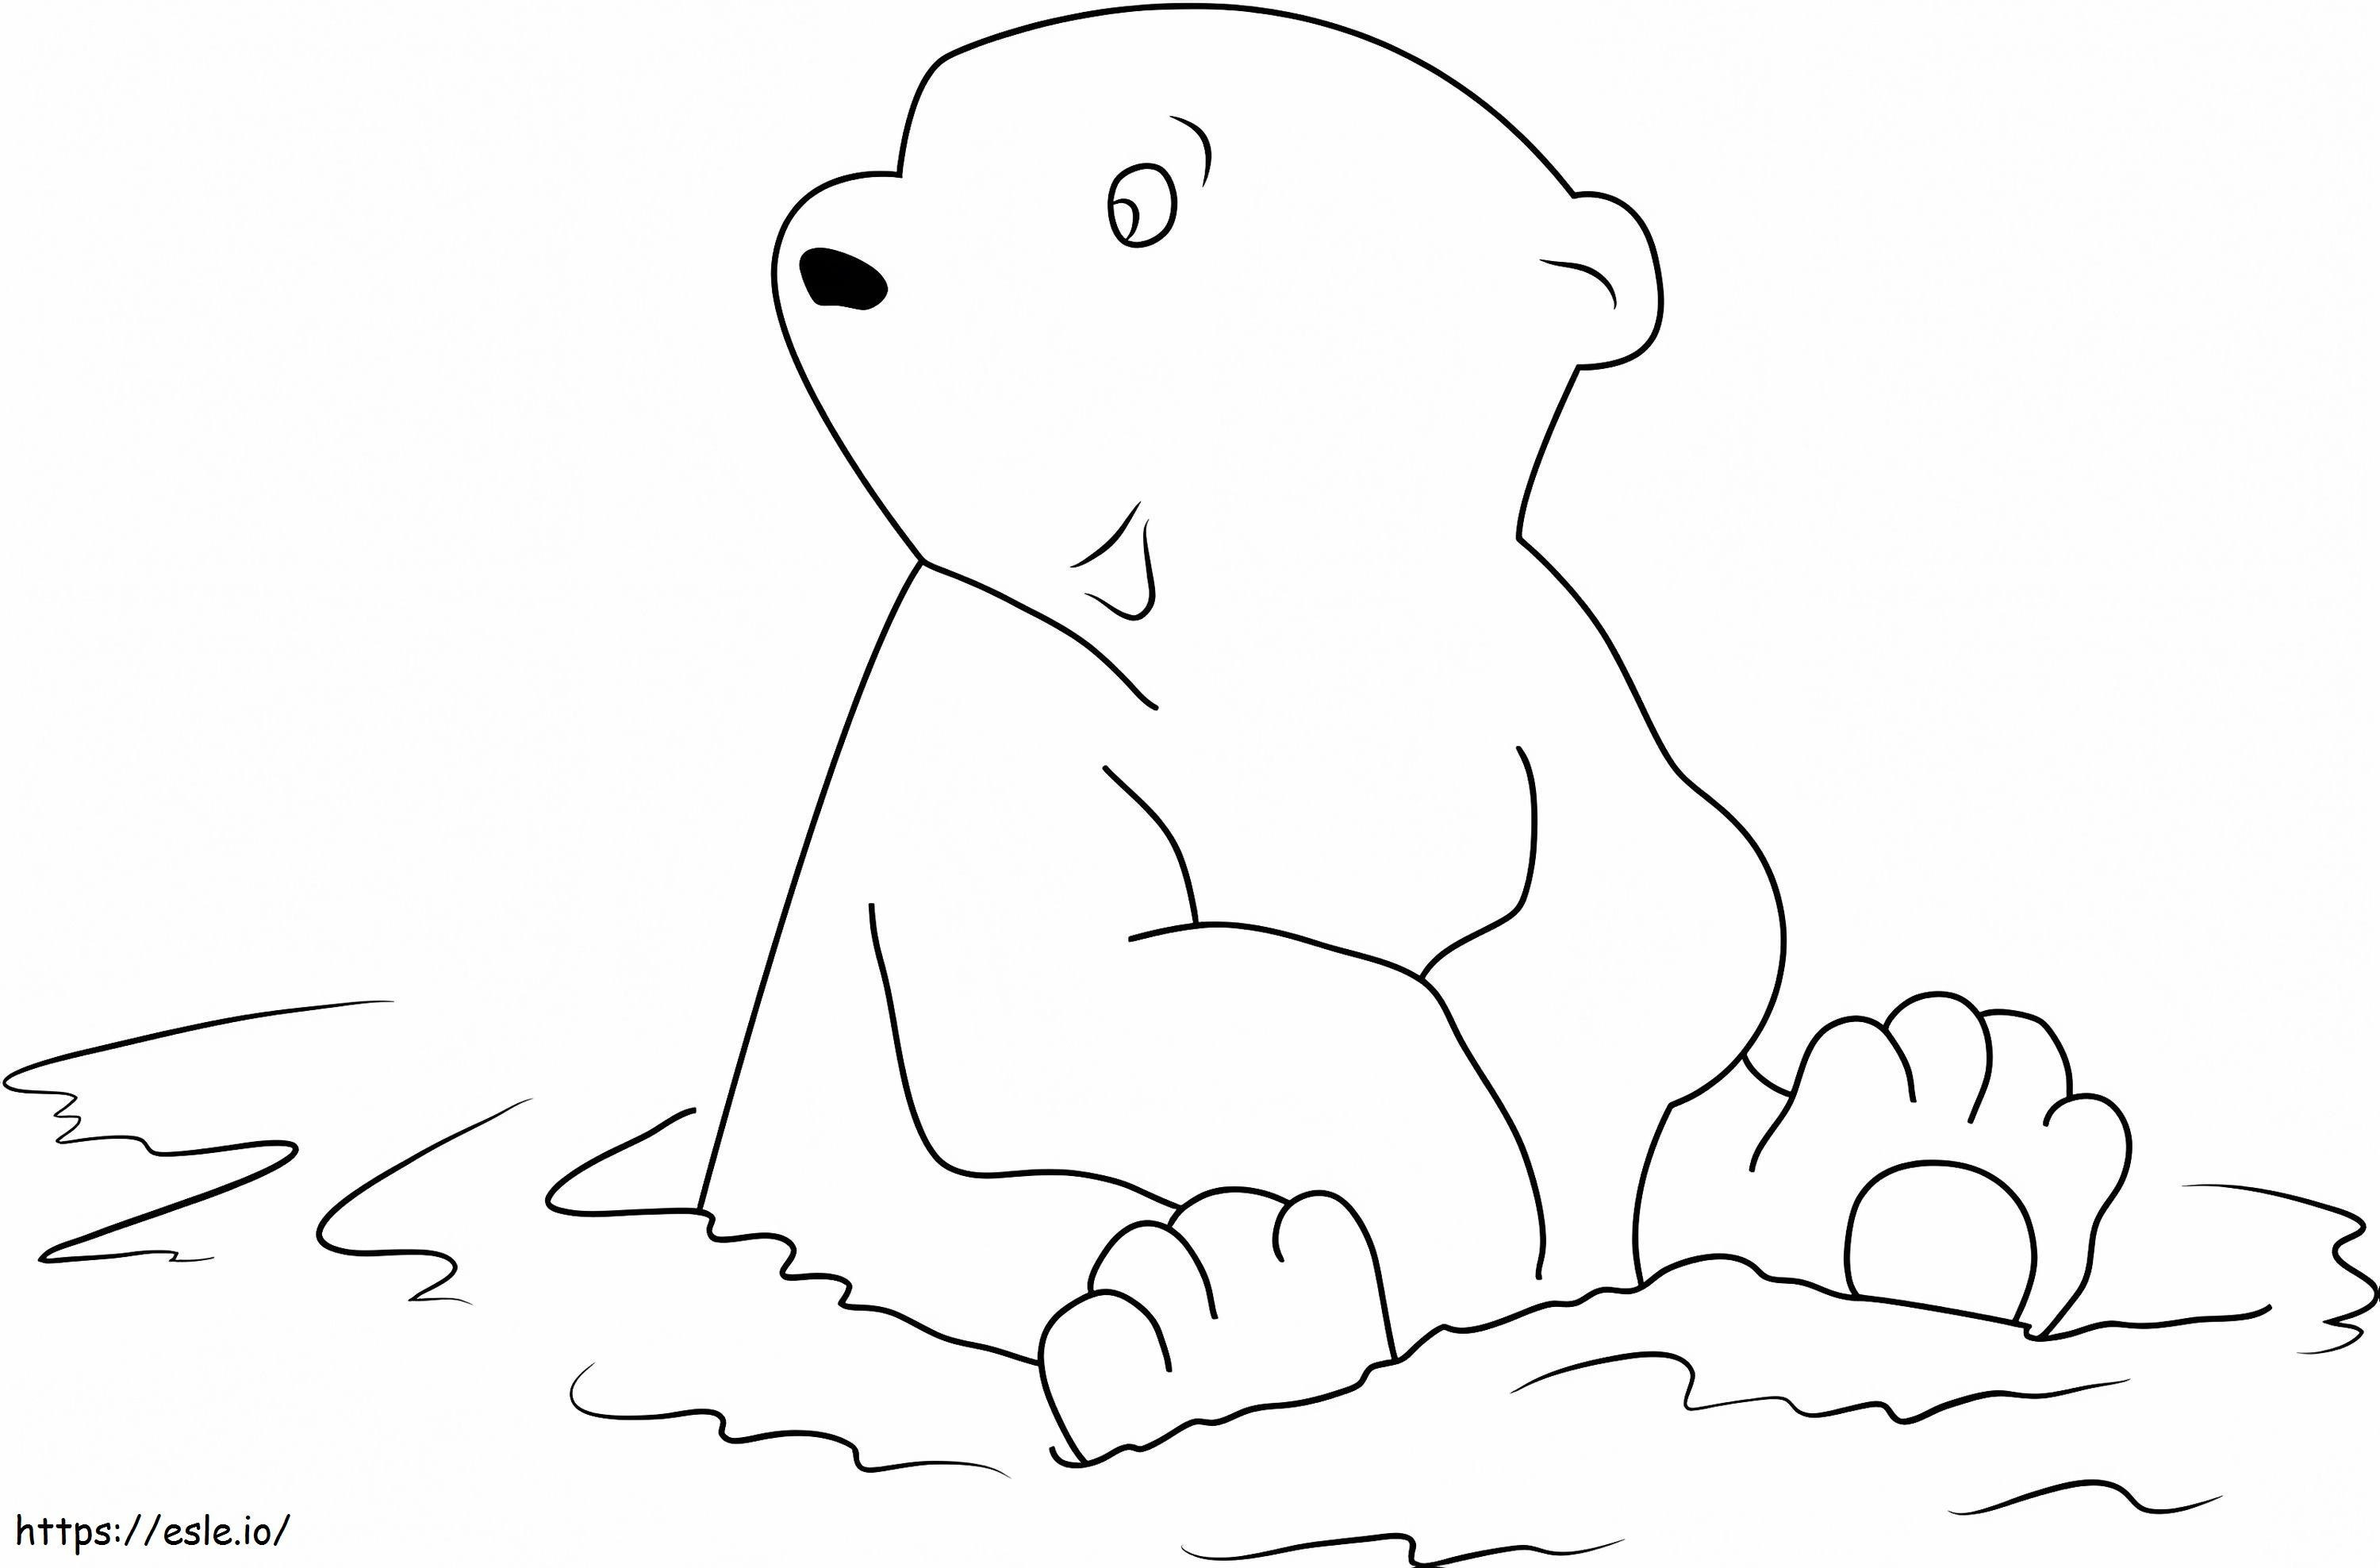 Lars Smiling A4 E1600338001110 coloring page